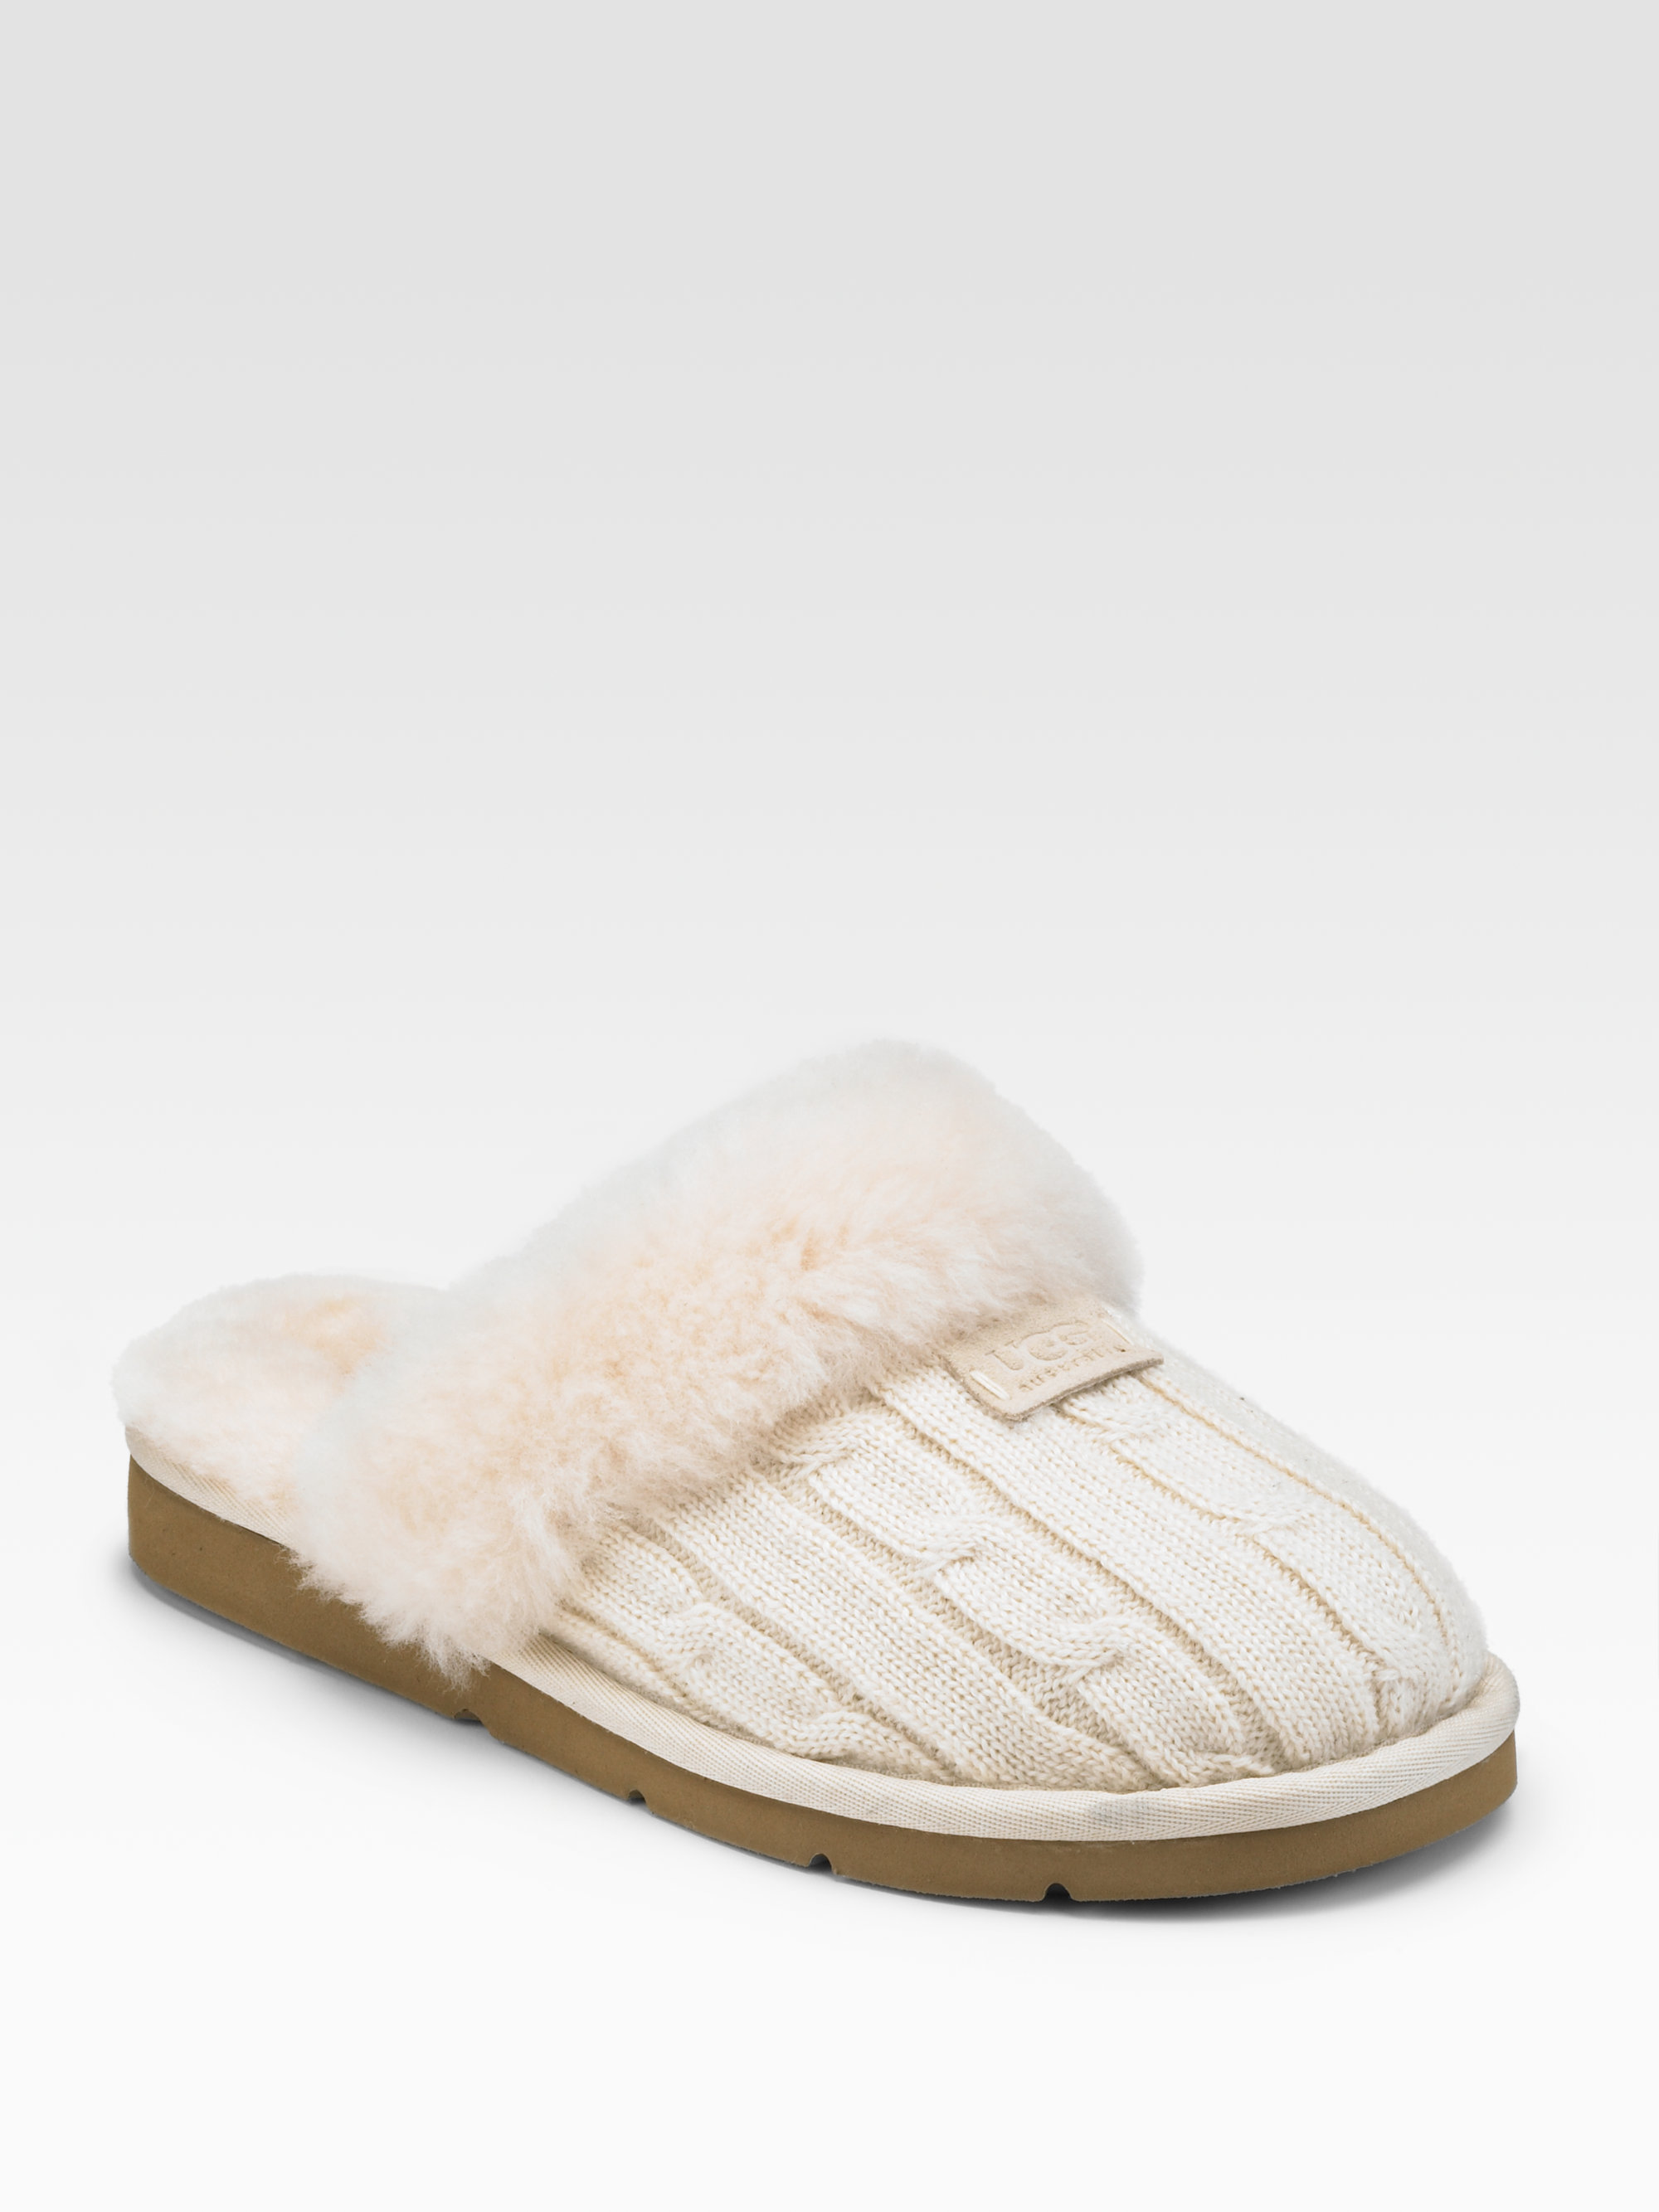 ugg wool slippers off 52 